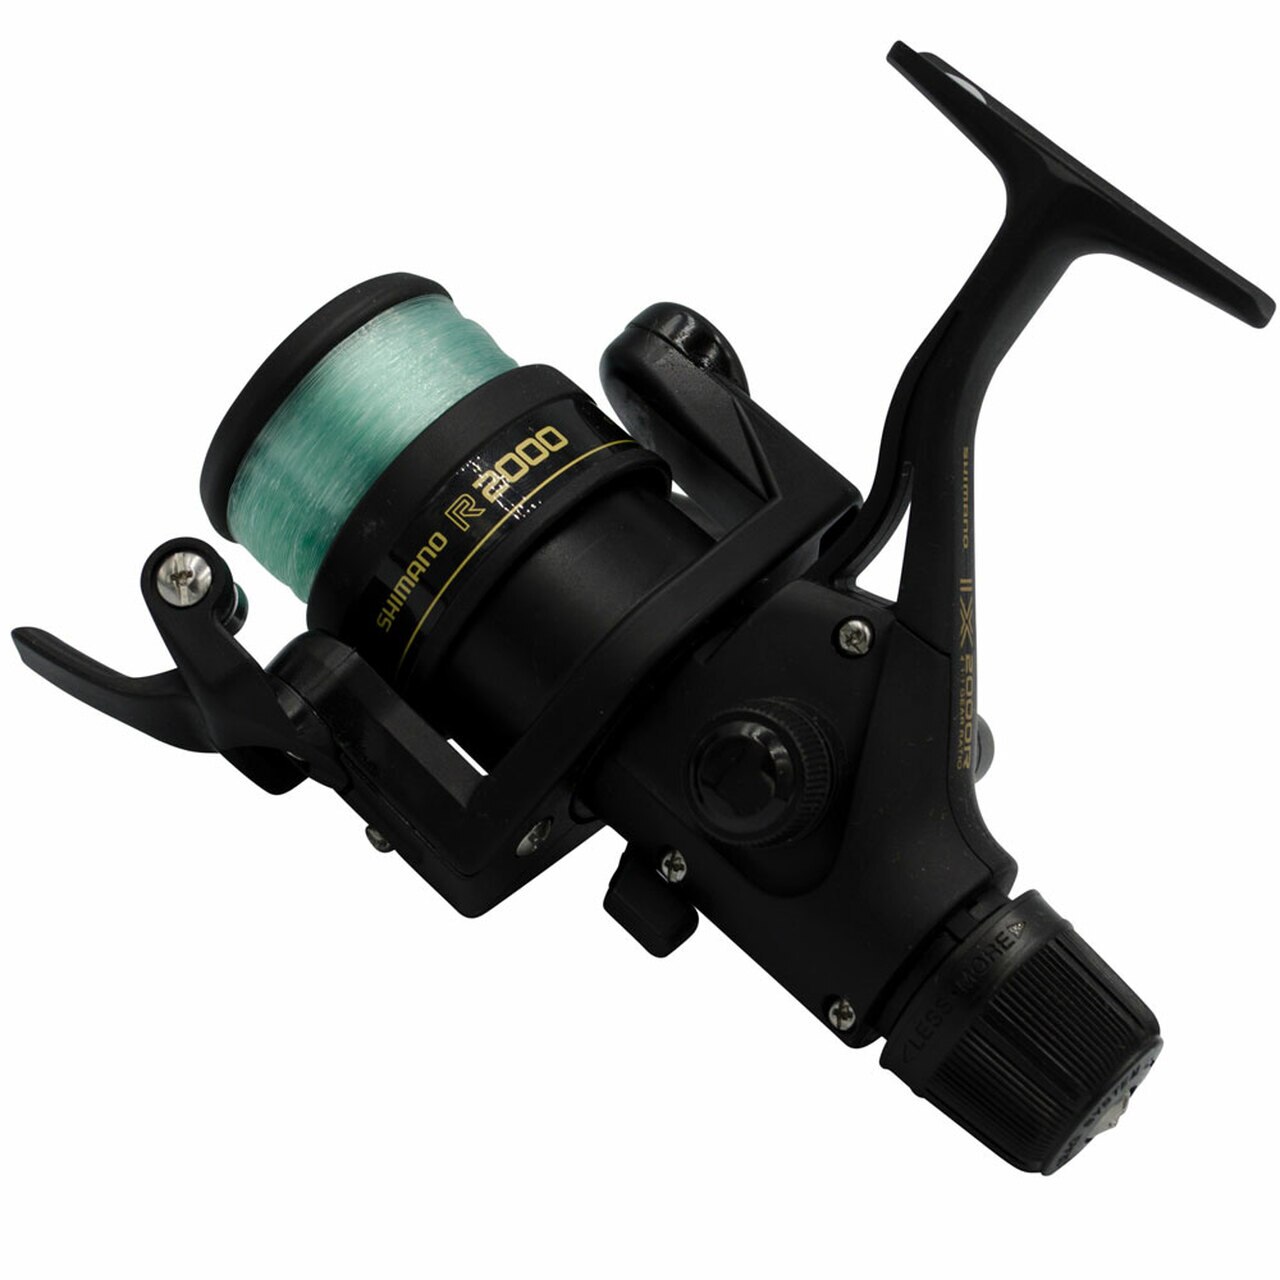 Shimano IX 2000R Fishing Spinning Reel R2000 Black Excellent Condition See  Pics 